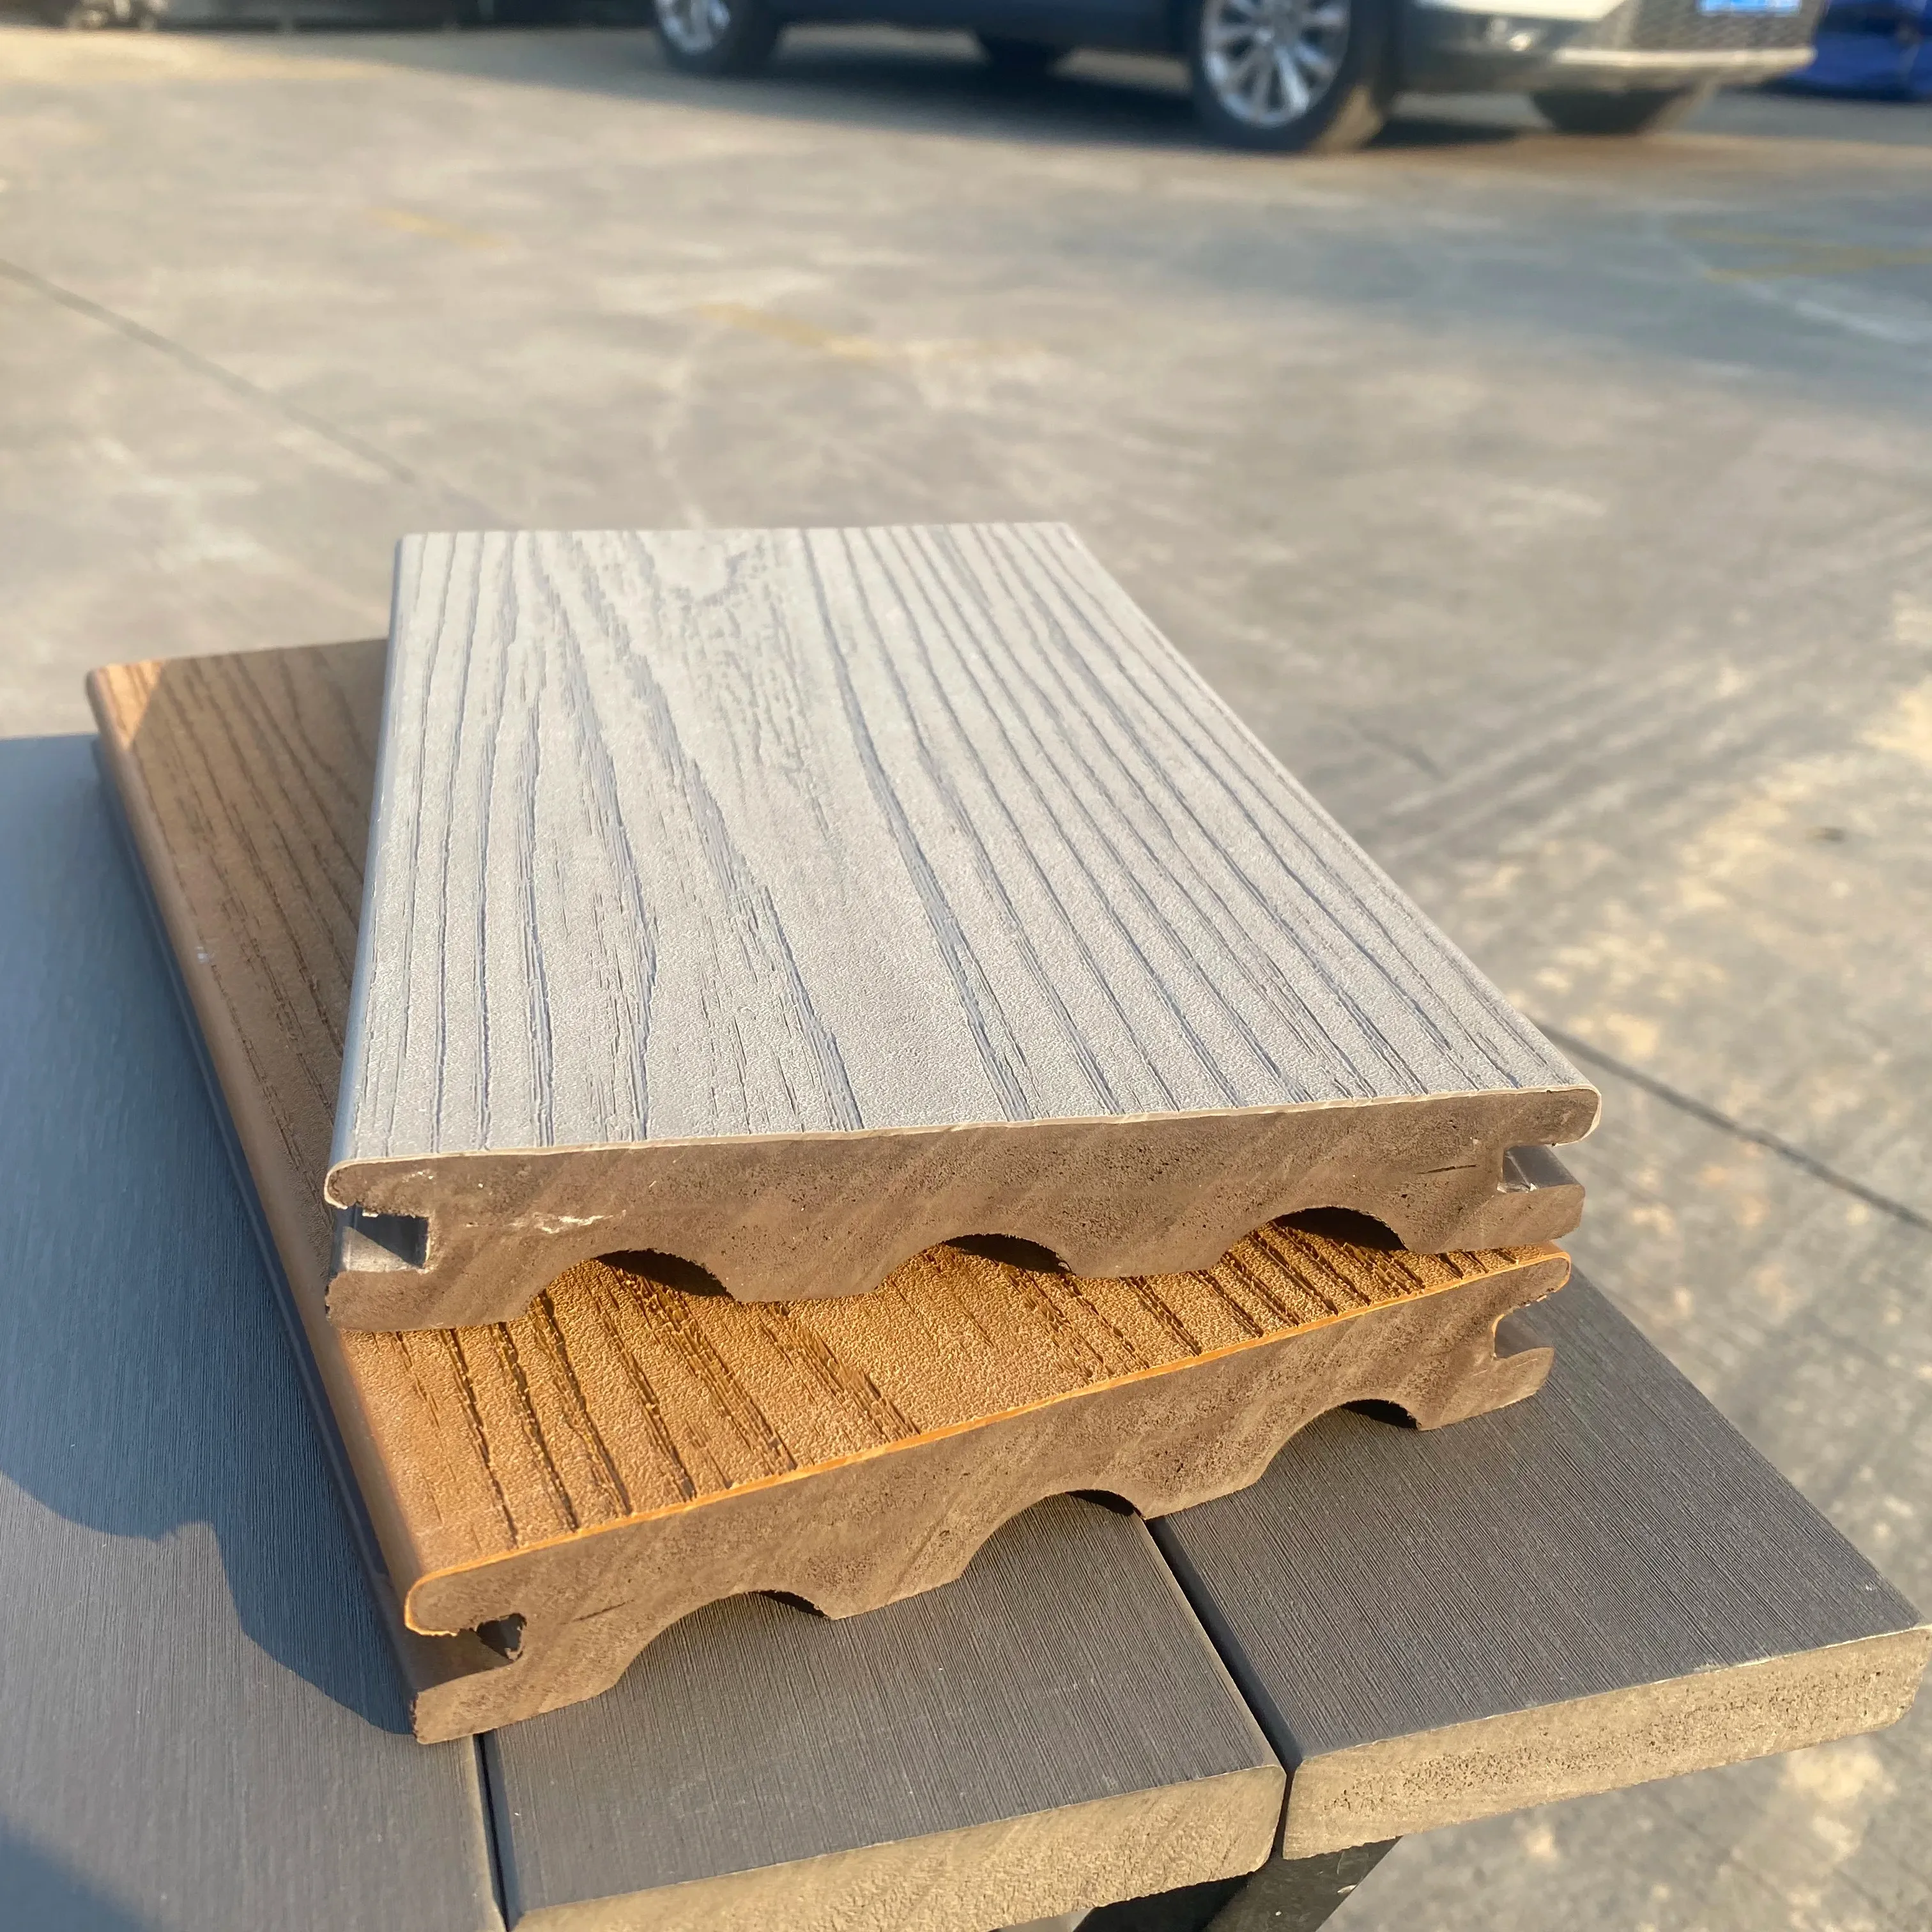 China factory ood price Decking Wood Grain PVC Decking Outdoor Flooring Pvc Wood Floating Composite Deck Outdoor